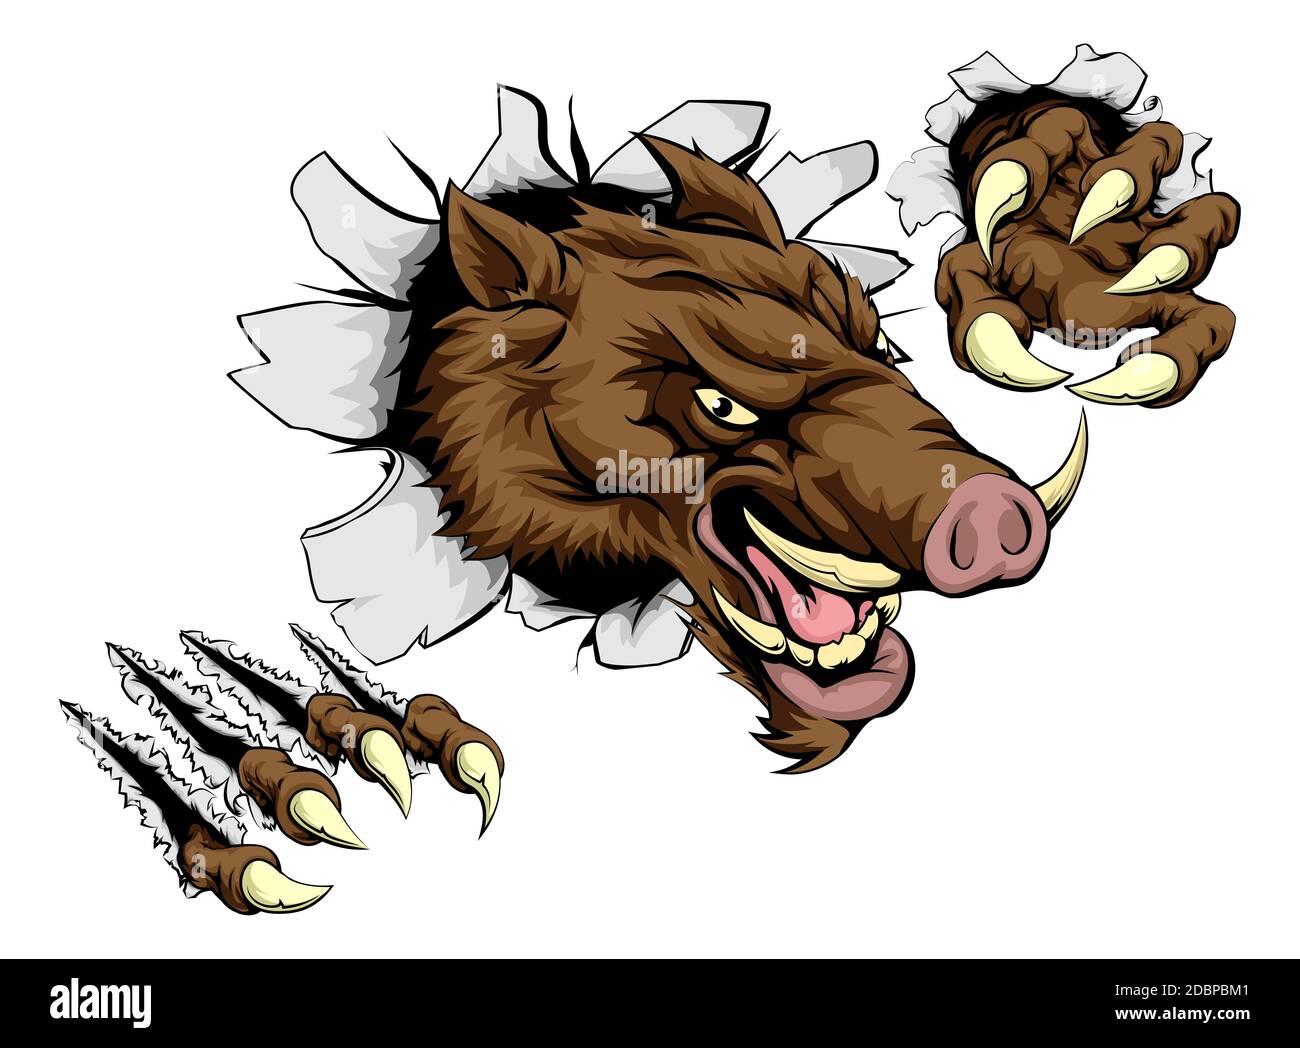 A scary boar animal mascot character breaking through wall with claws Stock Photo